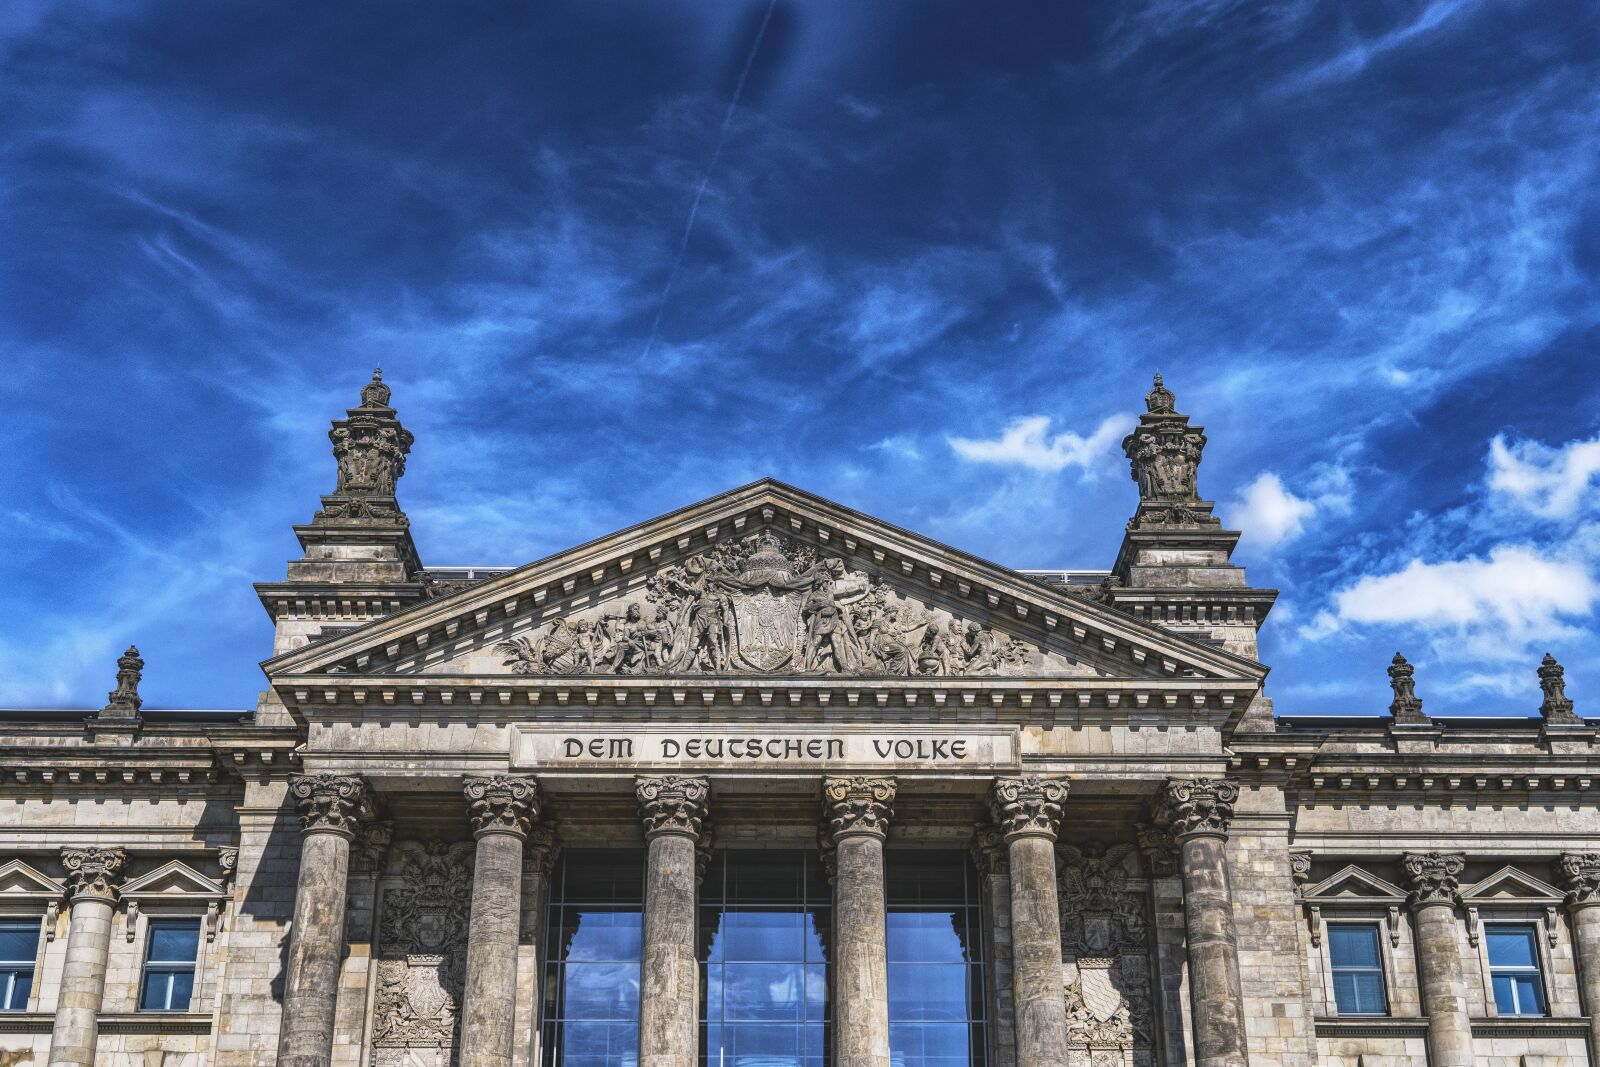 Sony a6300 sample photo. Bundestag, reichstag, berlin photography